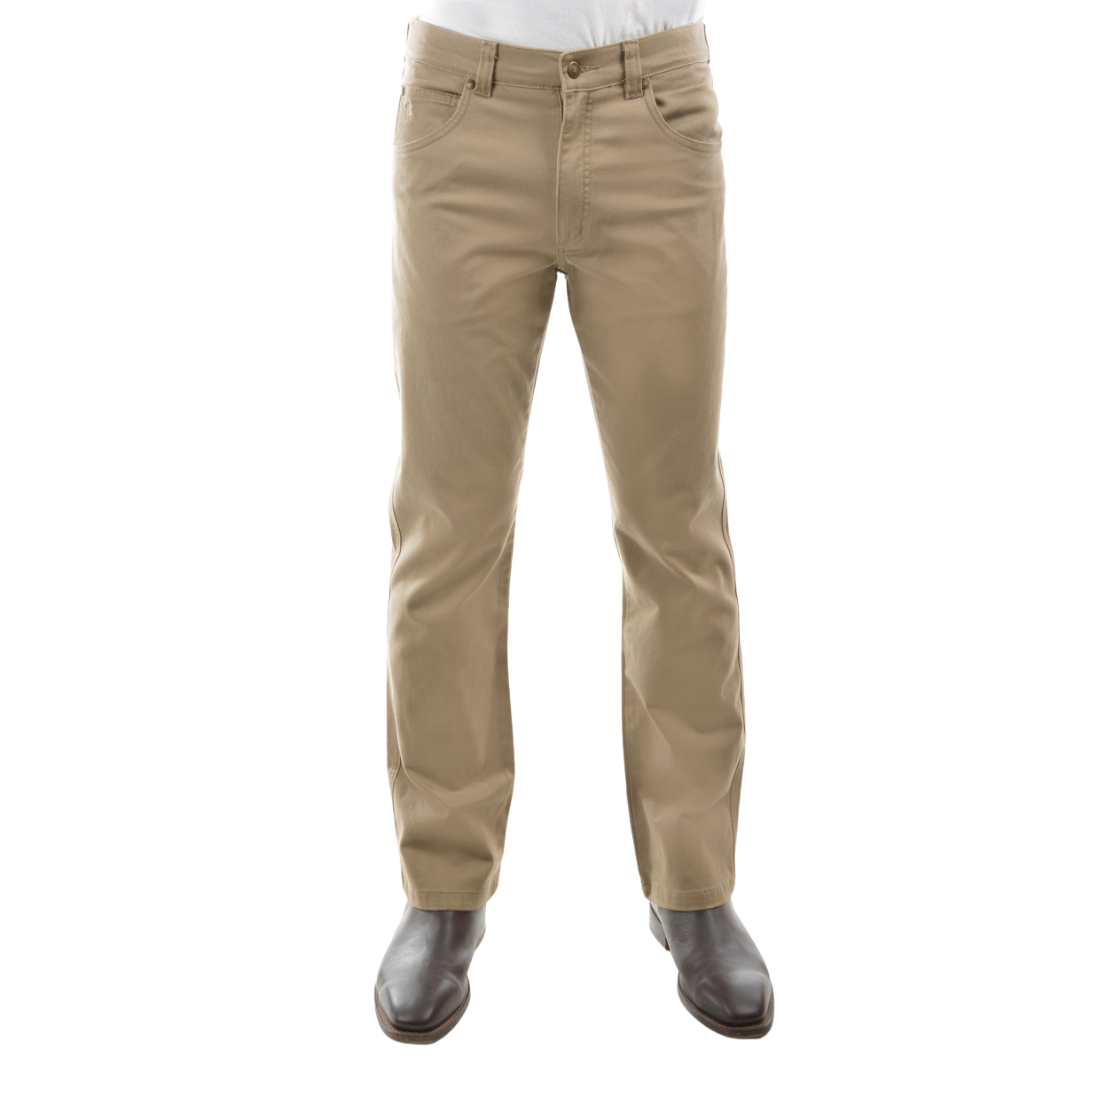 Wool Denim Stretch Jean 3232 Sand Mens Winter Bottoms by Thomas Cook | The Bloke Shop